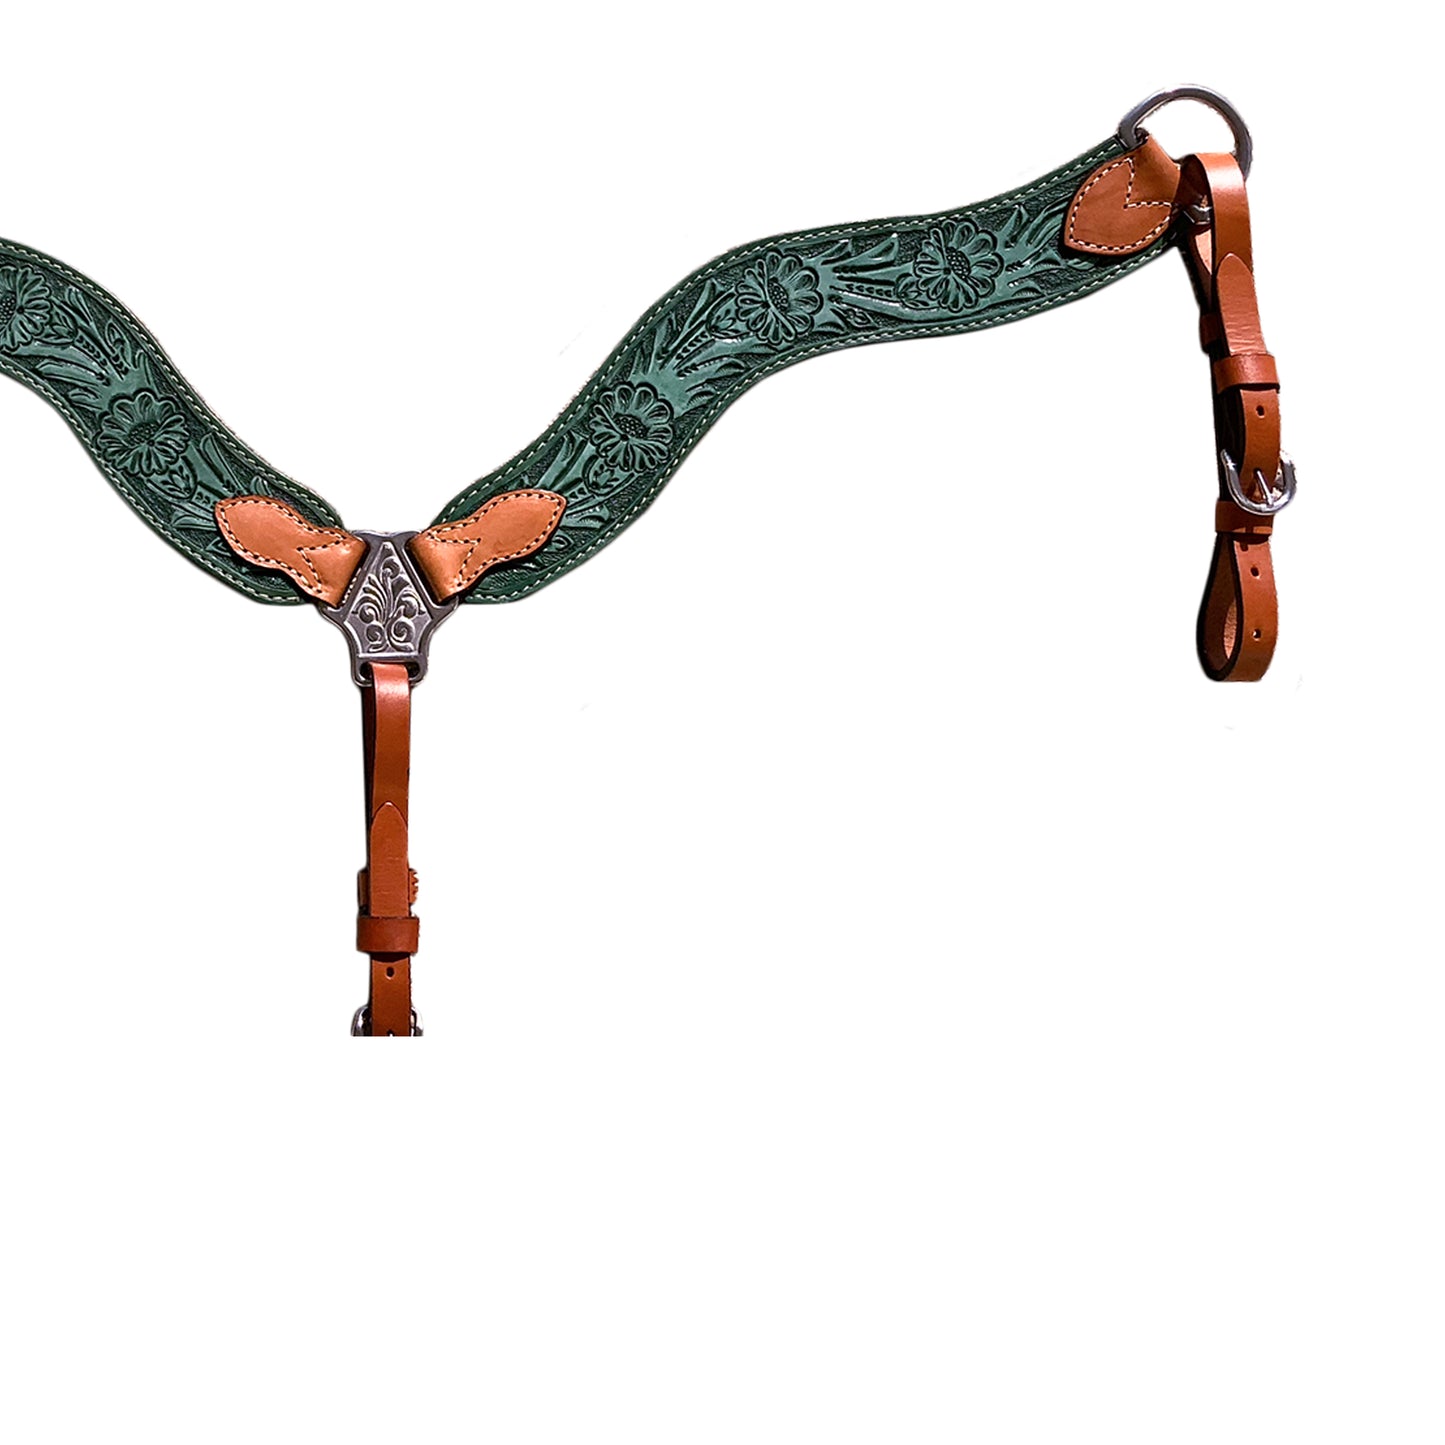 2-1/2" Wave breast collar rough out turquoise and golden leather floral tooled (color may vary).